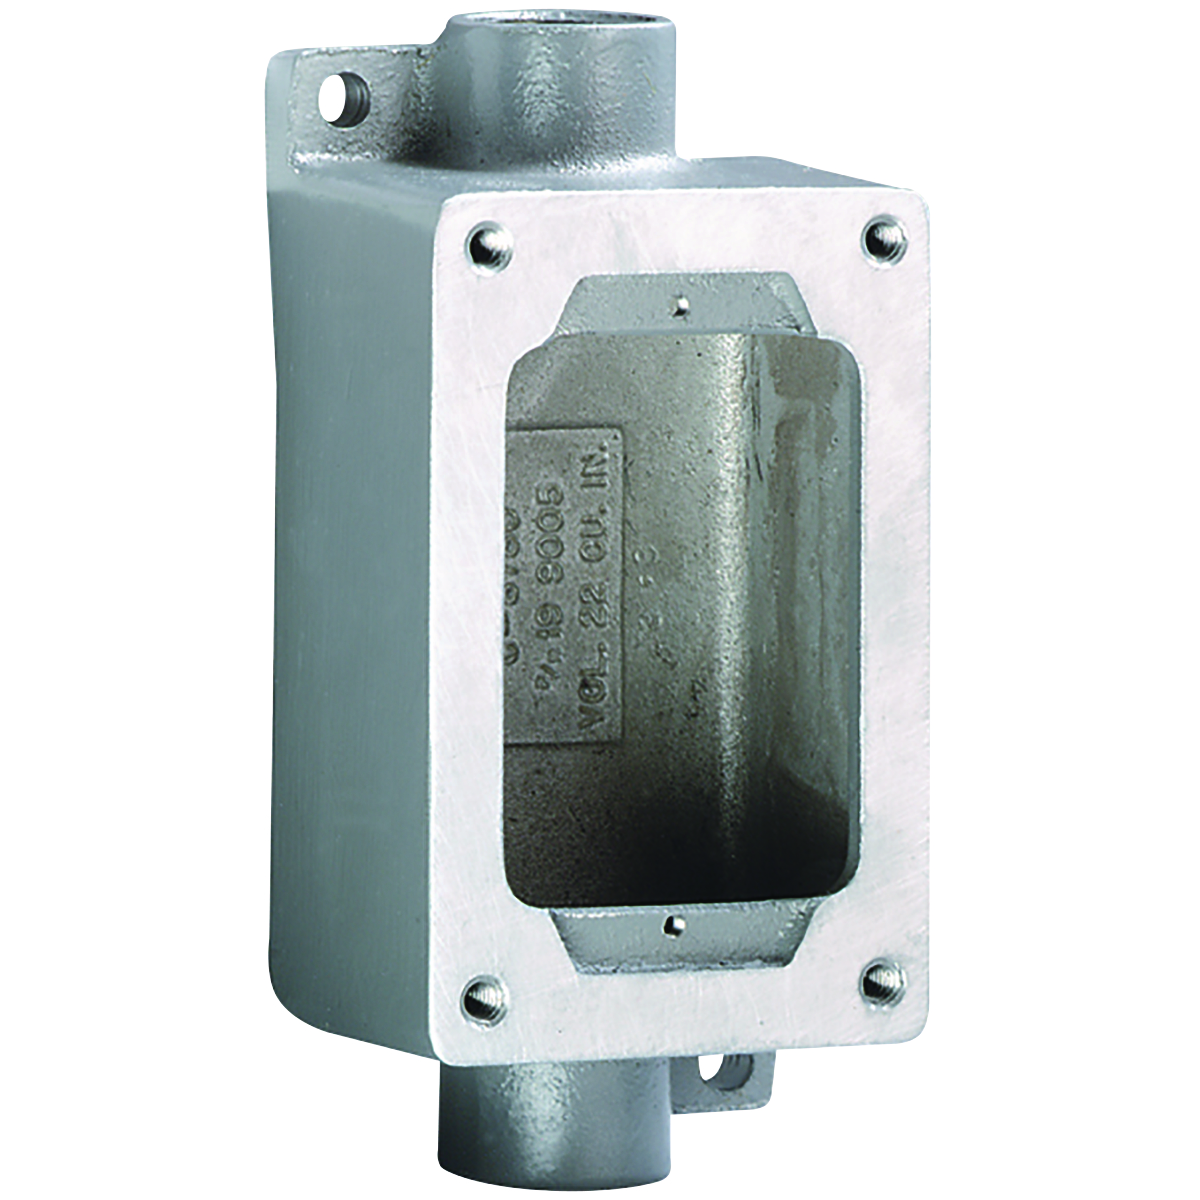 SWB SERIES - ALUMINUM FEED-THRU SINGLE-GANG DEVICE BODY FOR USE WITHXCS/XS/XT COVER ASSEMBLIES - HUB SIZE 1 INCH